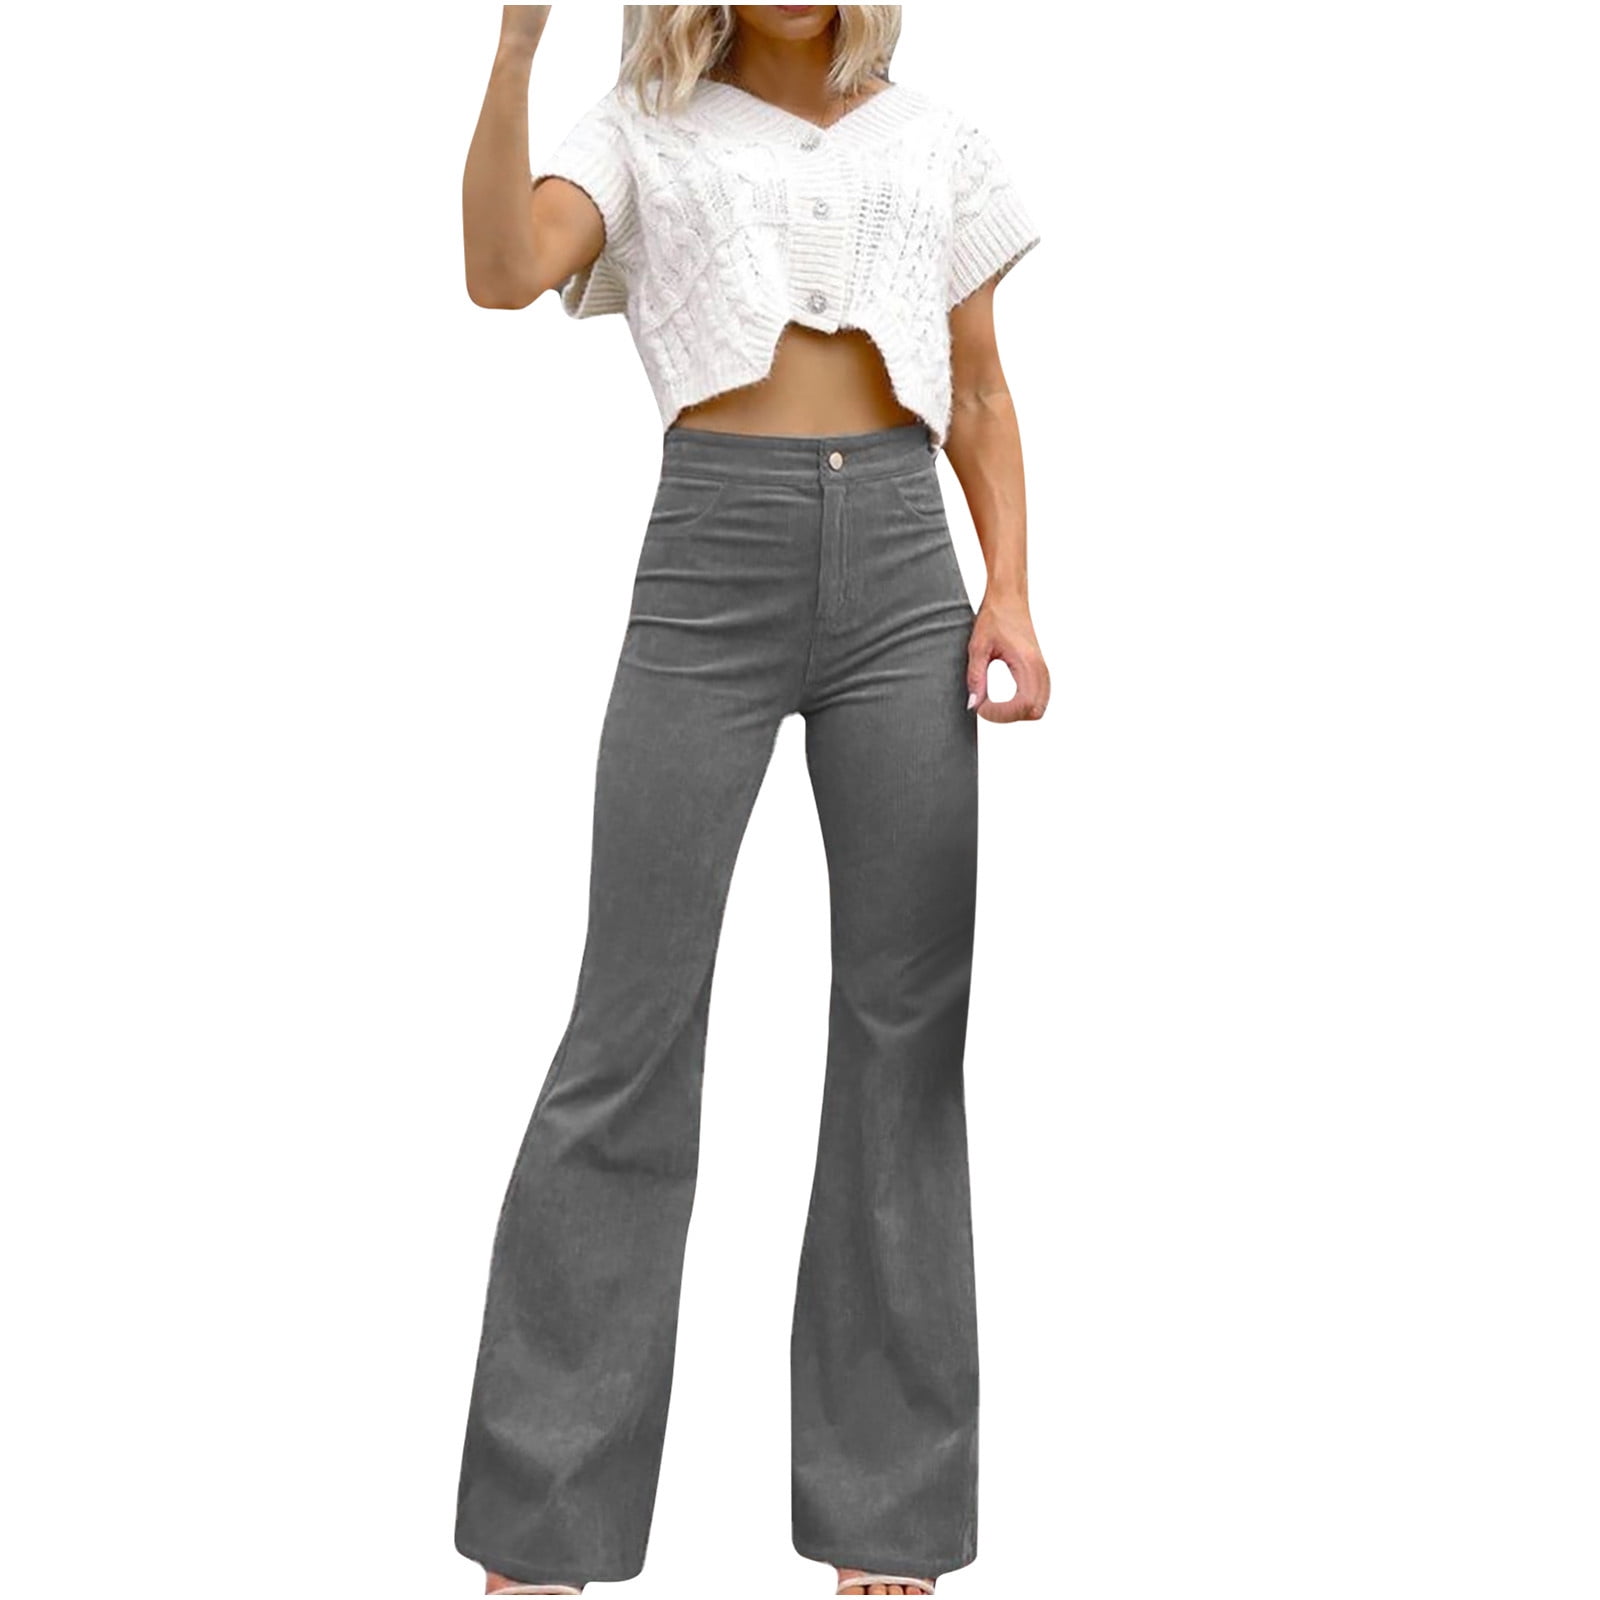 Women Corduroy Flare Pants Fashion Slim Fit Comfortable Solid Color Pocket  Casual Flared Pants Vintage Trousers 